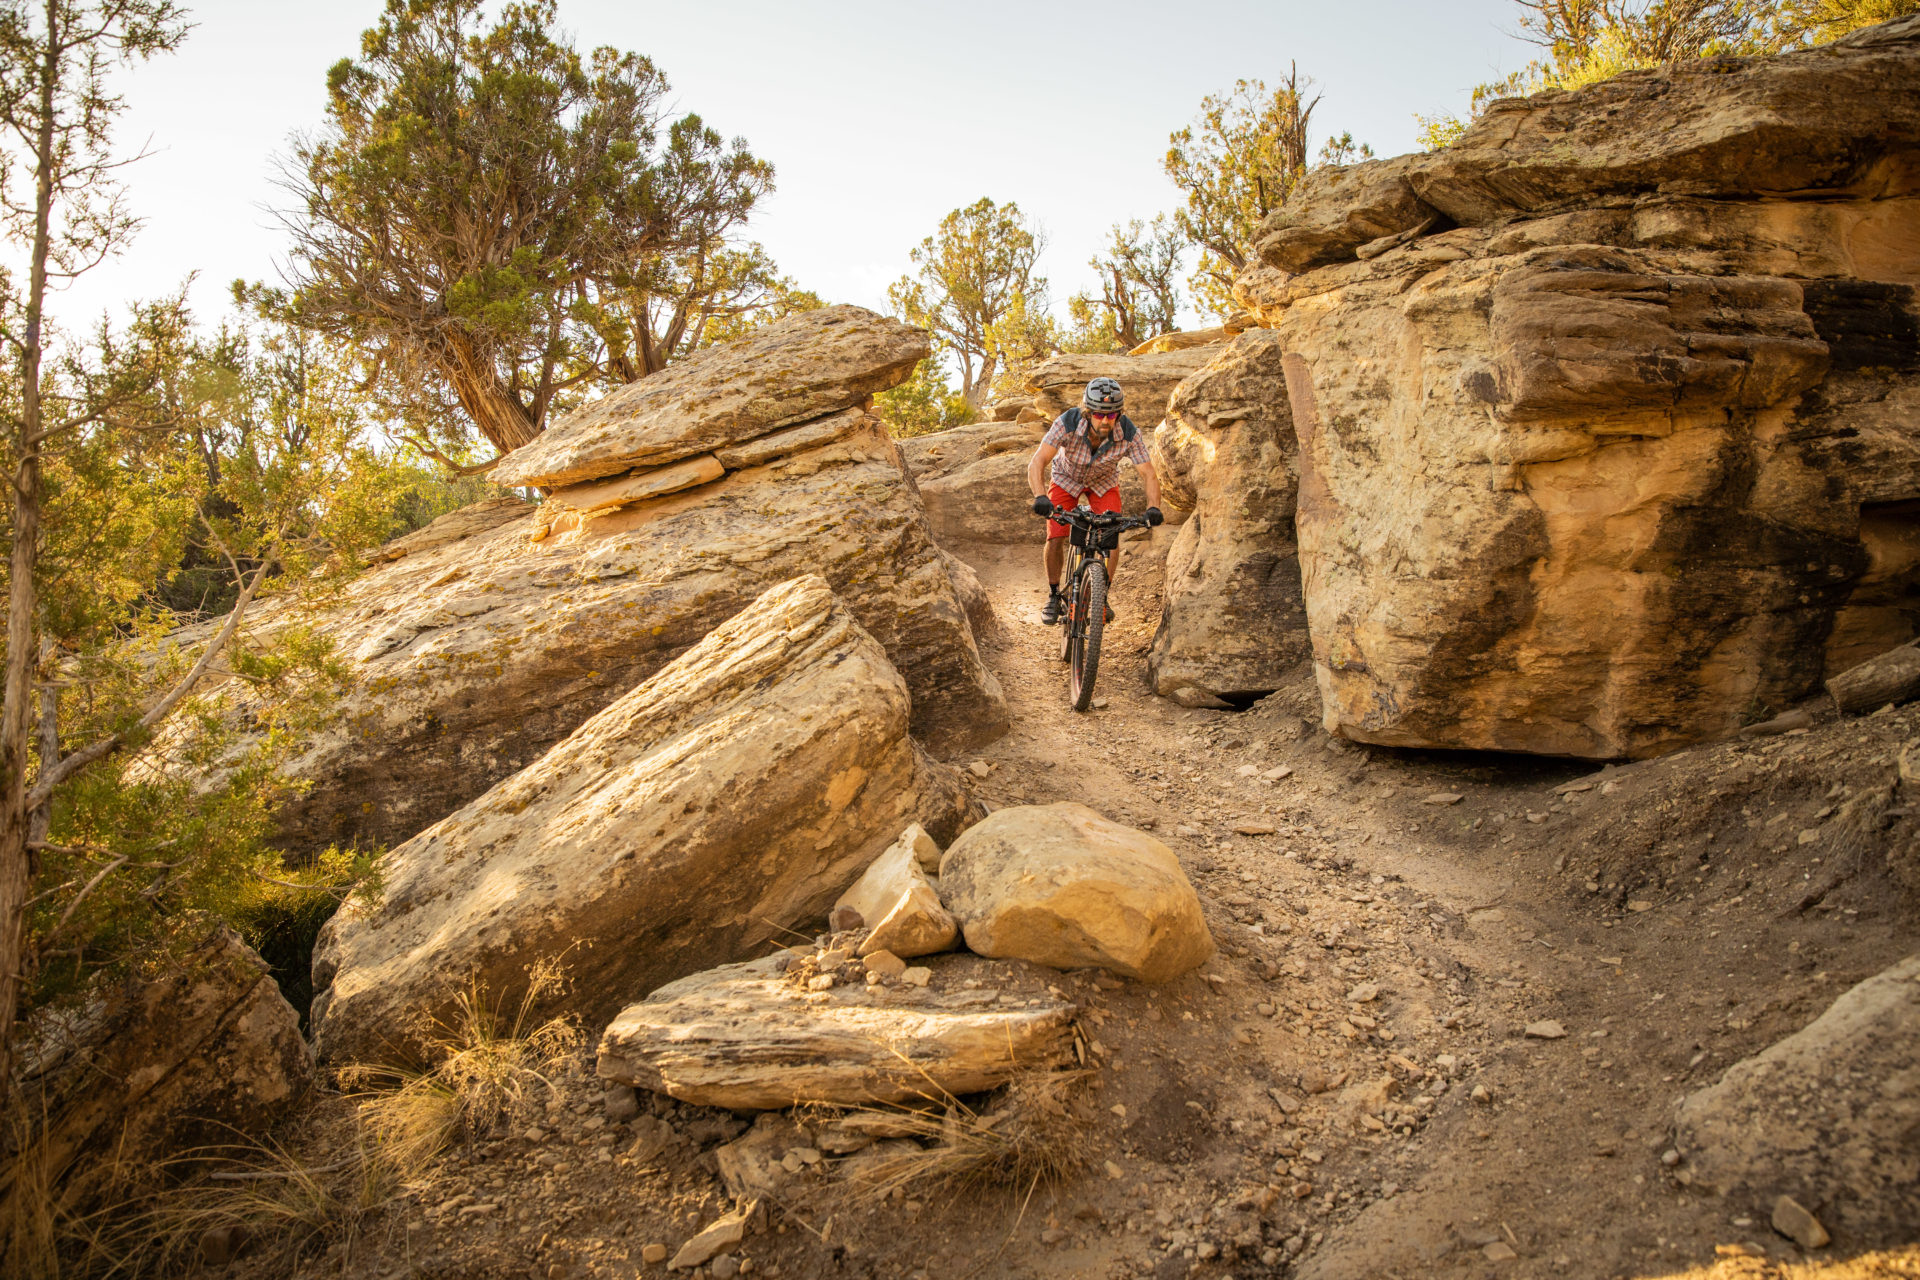 A person rides a mountain bike down a trail flanked by large rocks.